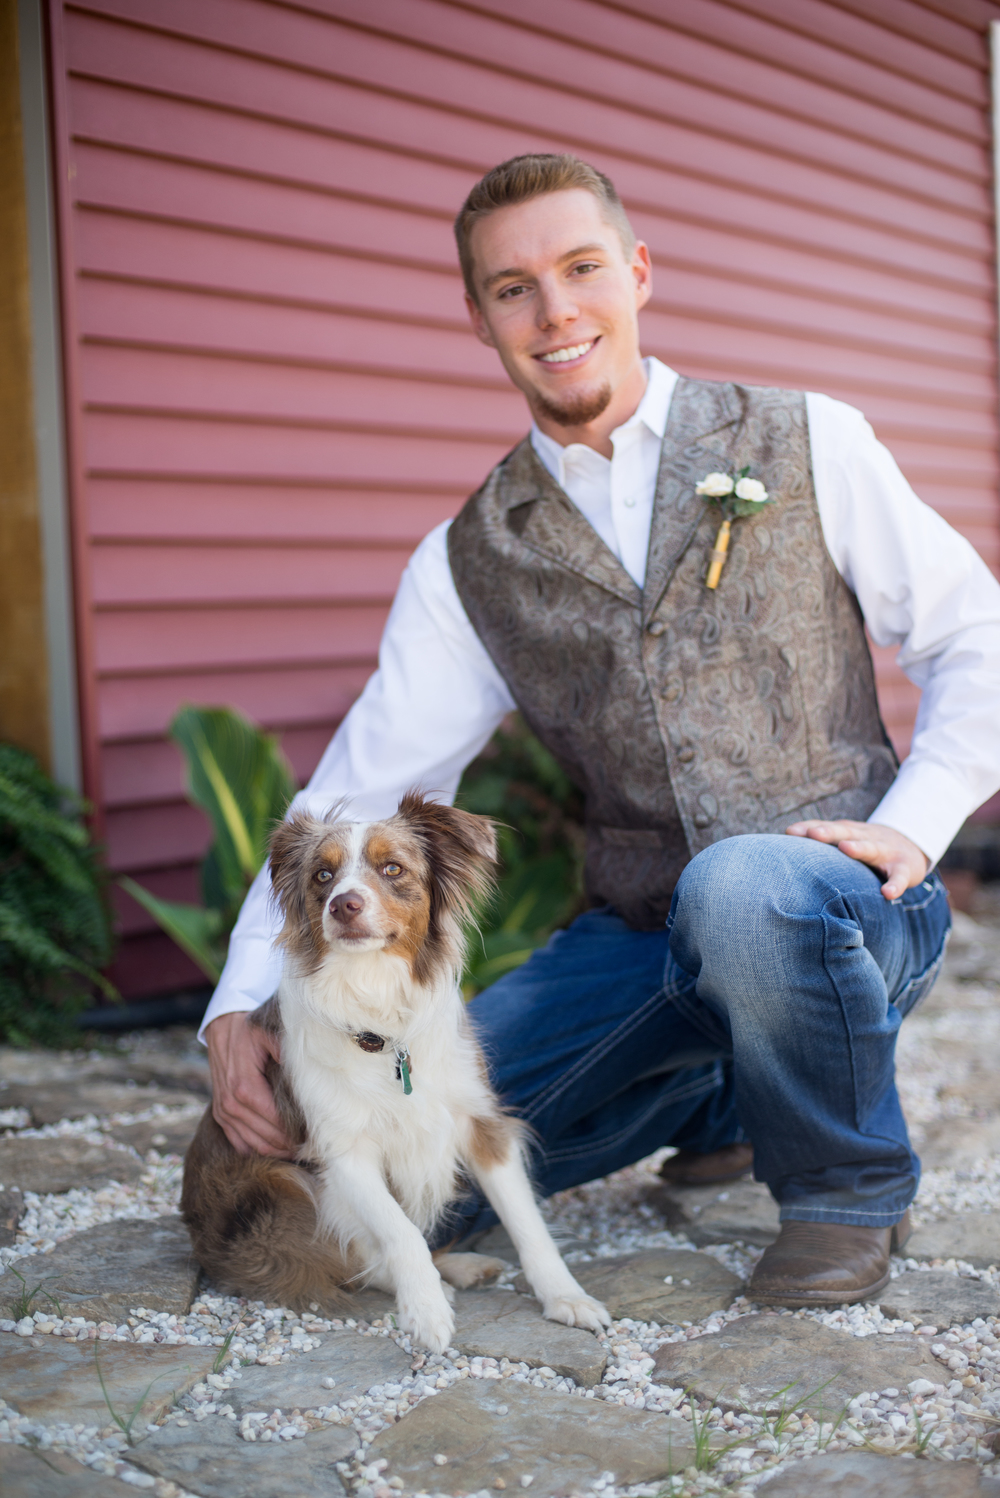 The Groom and his furry buddy